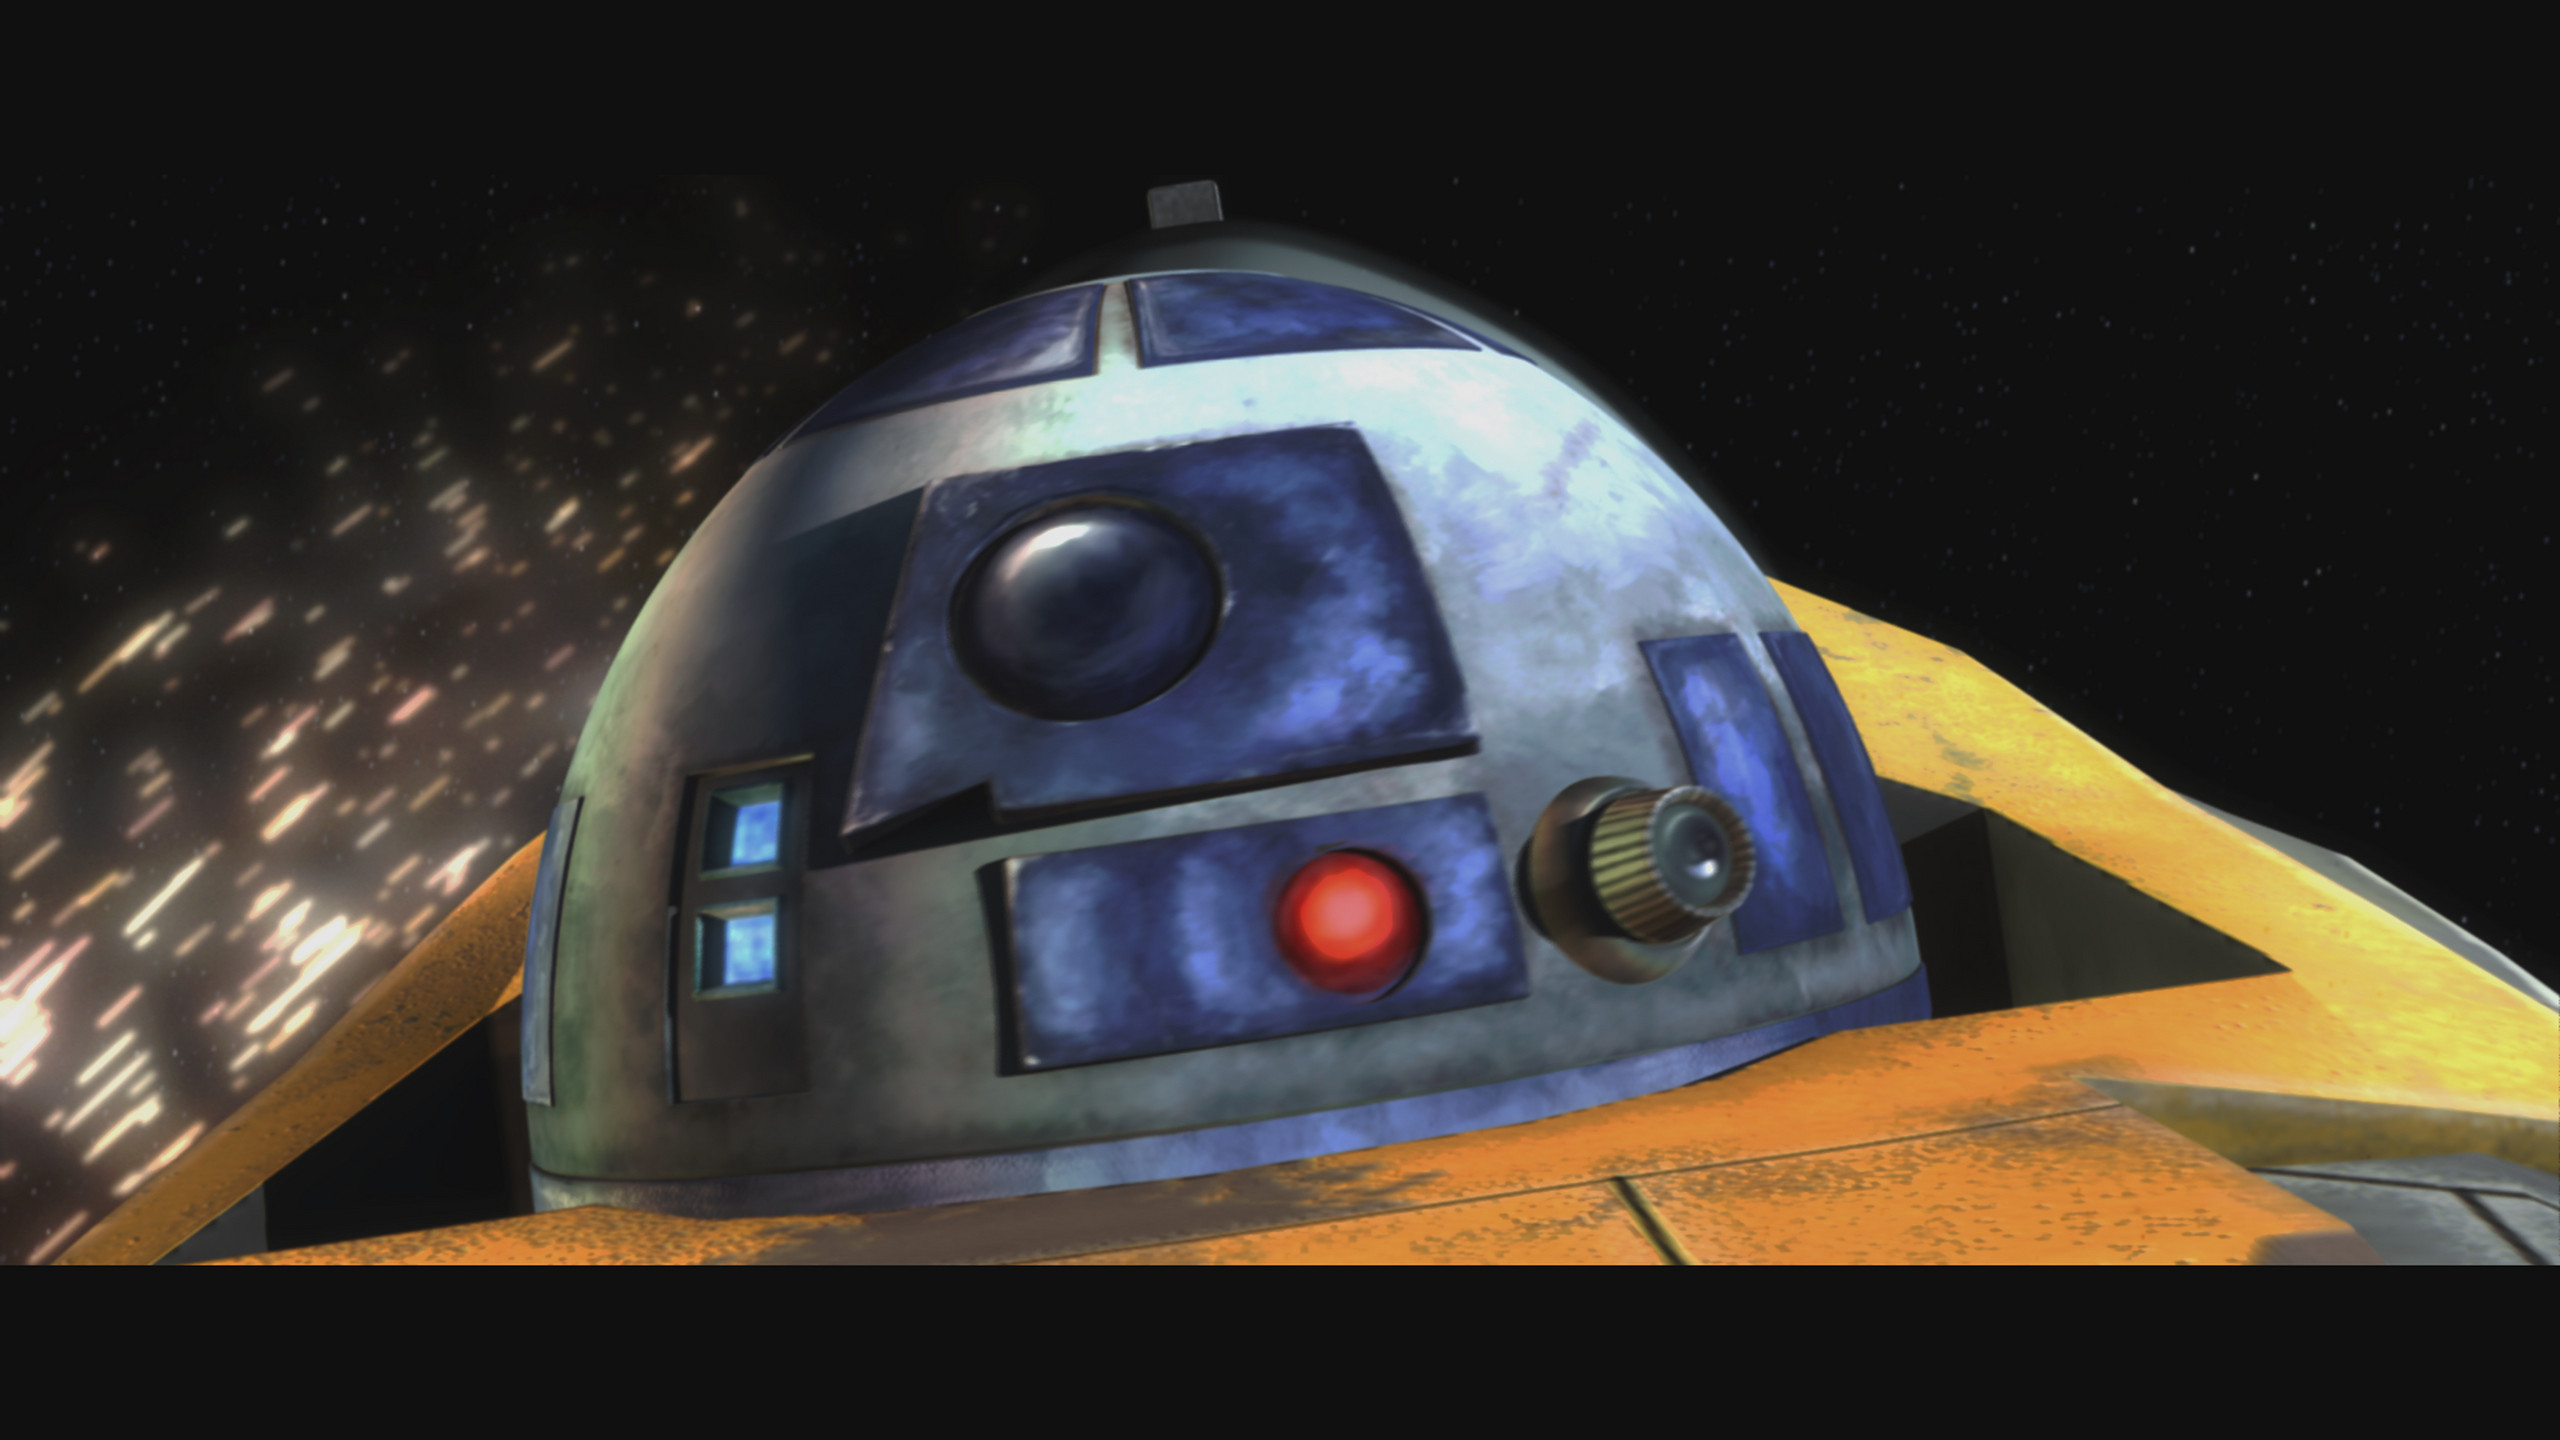 2560x1440 R2-D2 images Clone Wars Artoo HD wallpaper and background photos